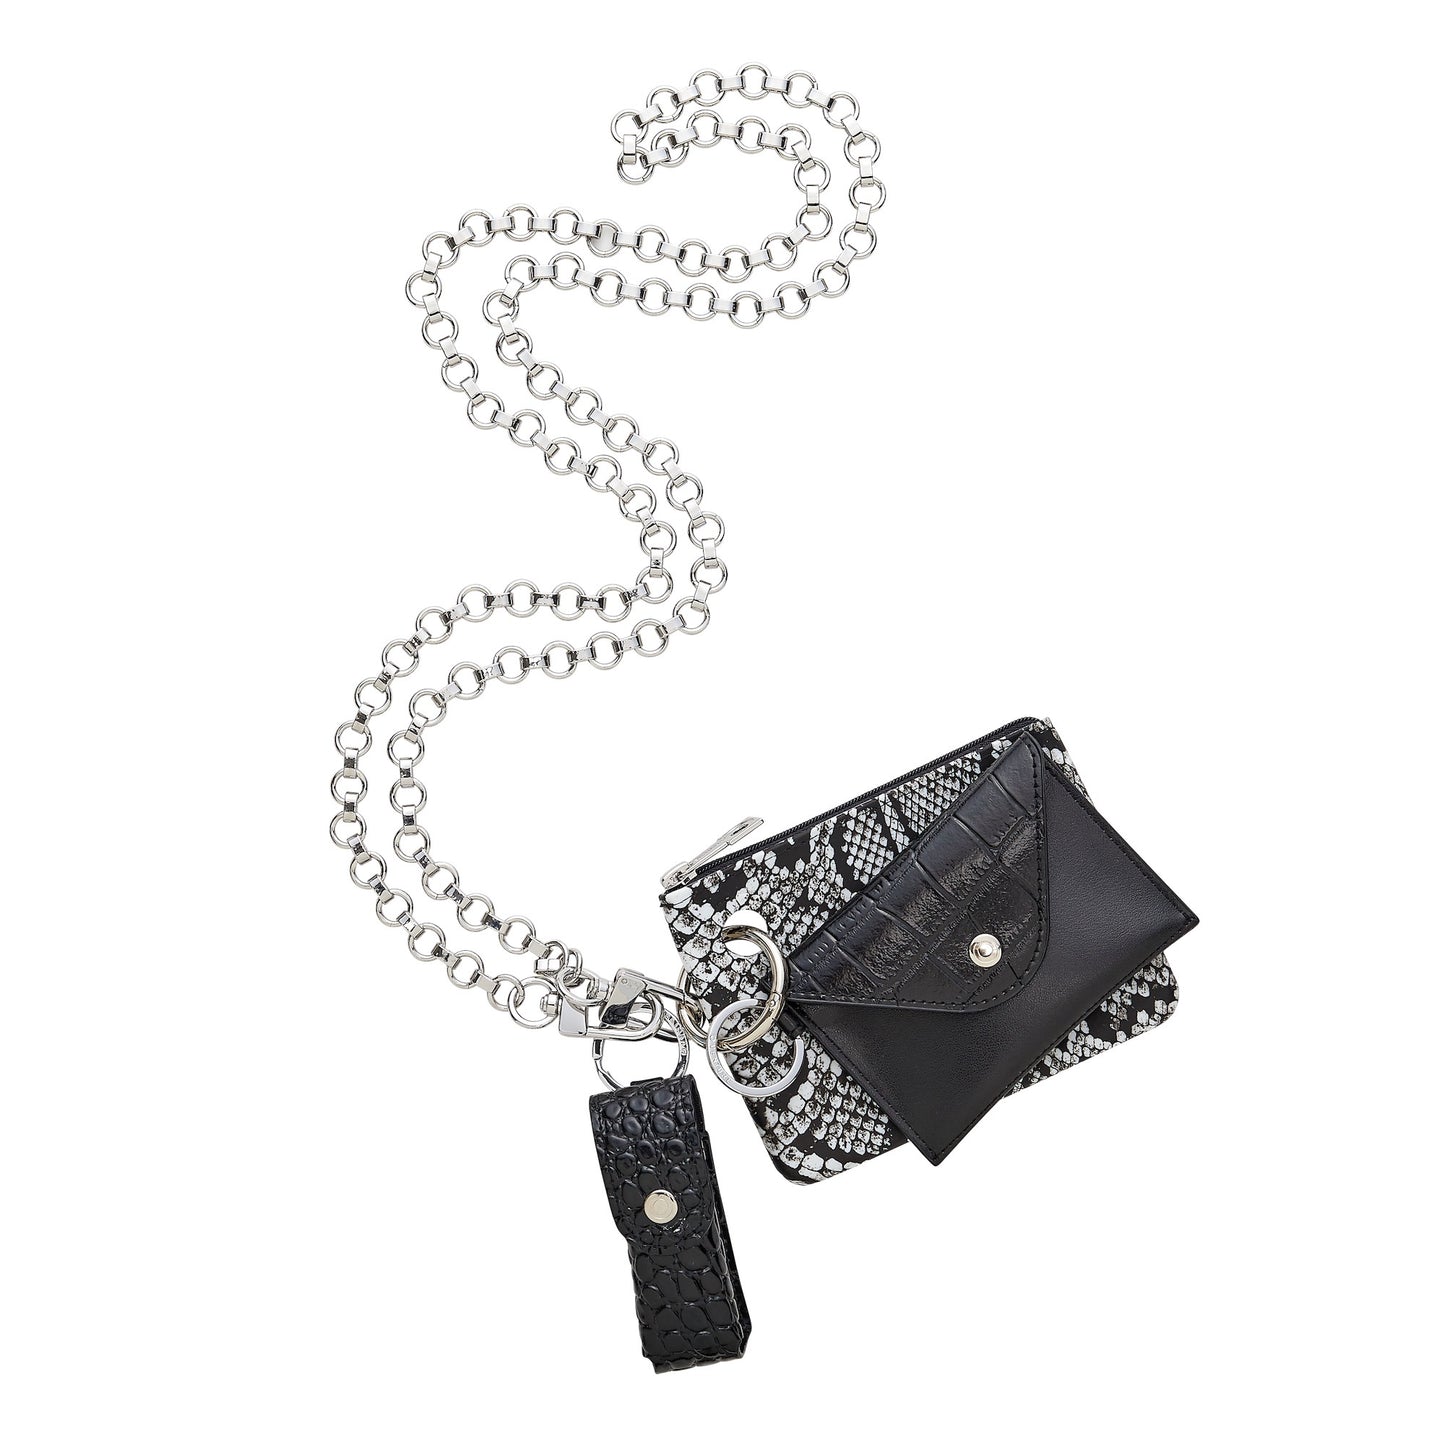 A crossbody chain with a black lipstick holder, small black wallet and snakeskin printed silicone pouch.